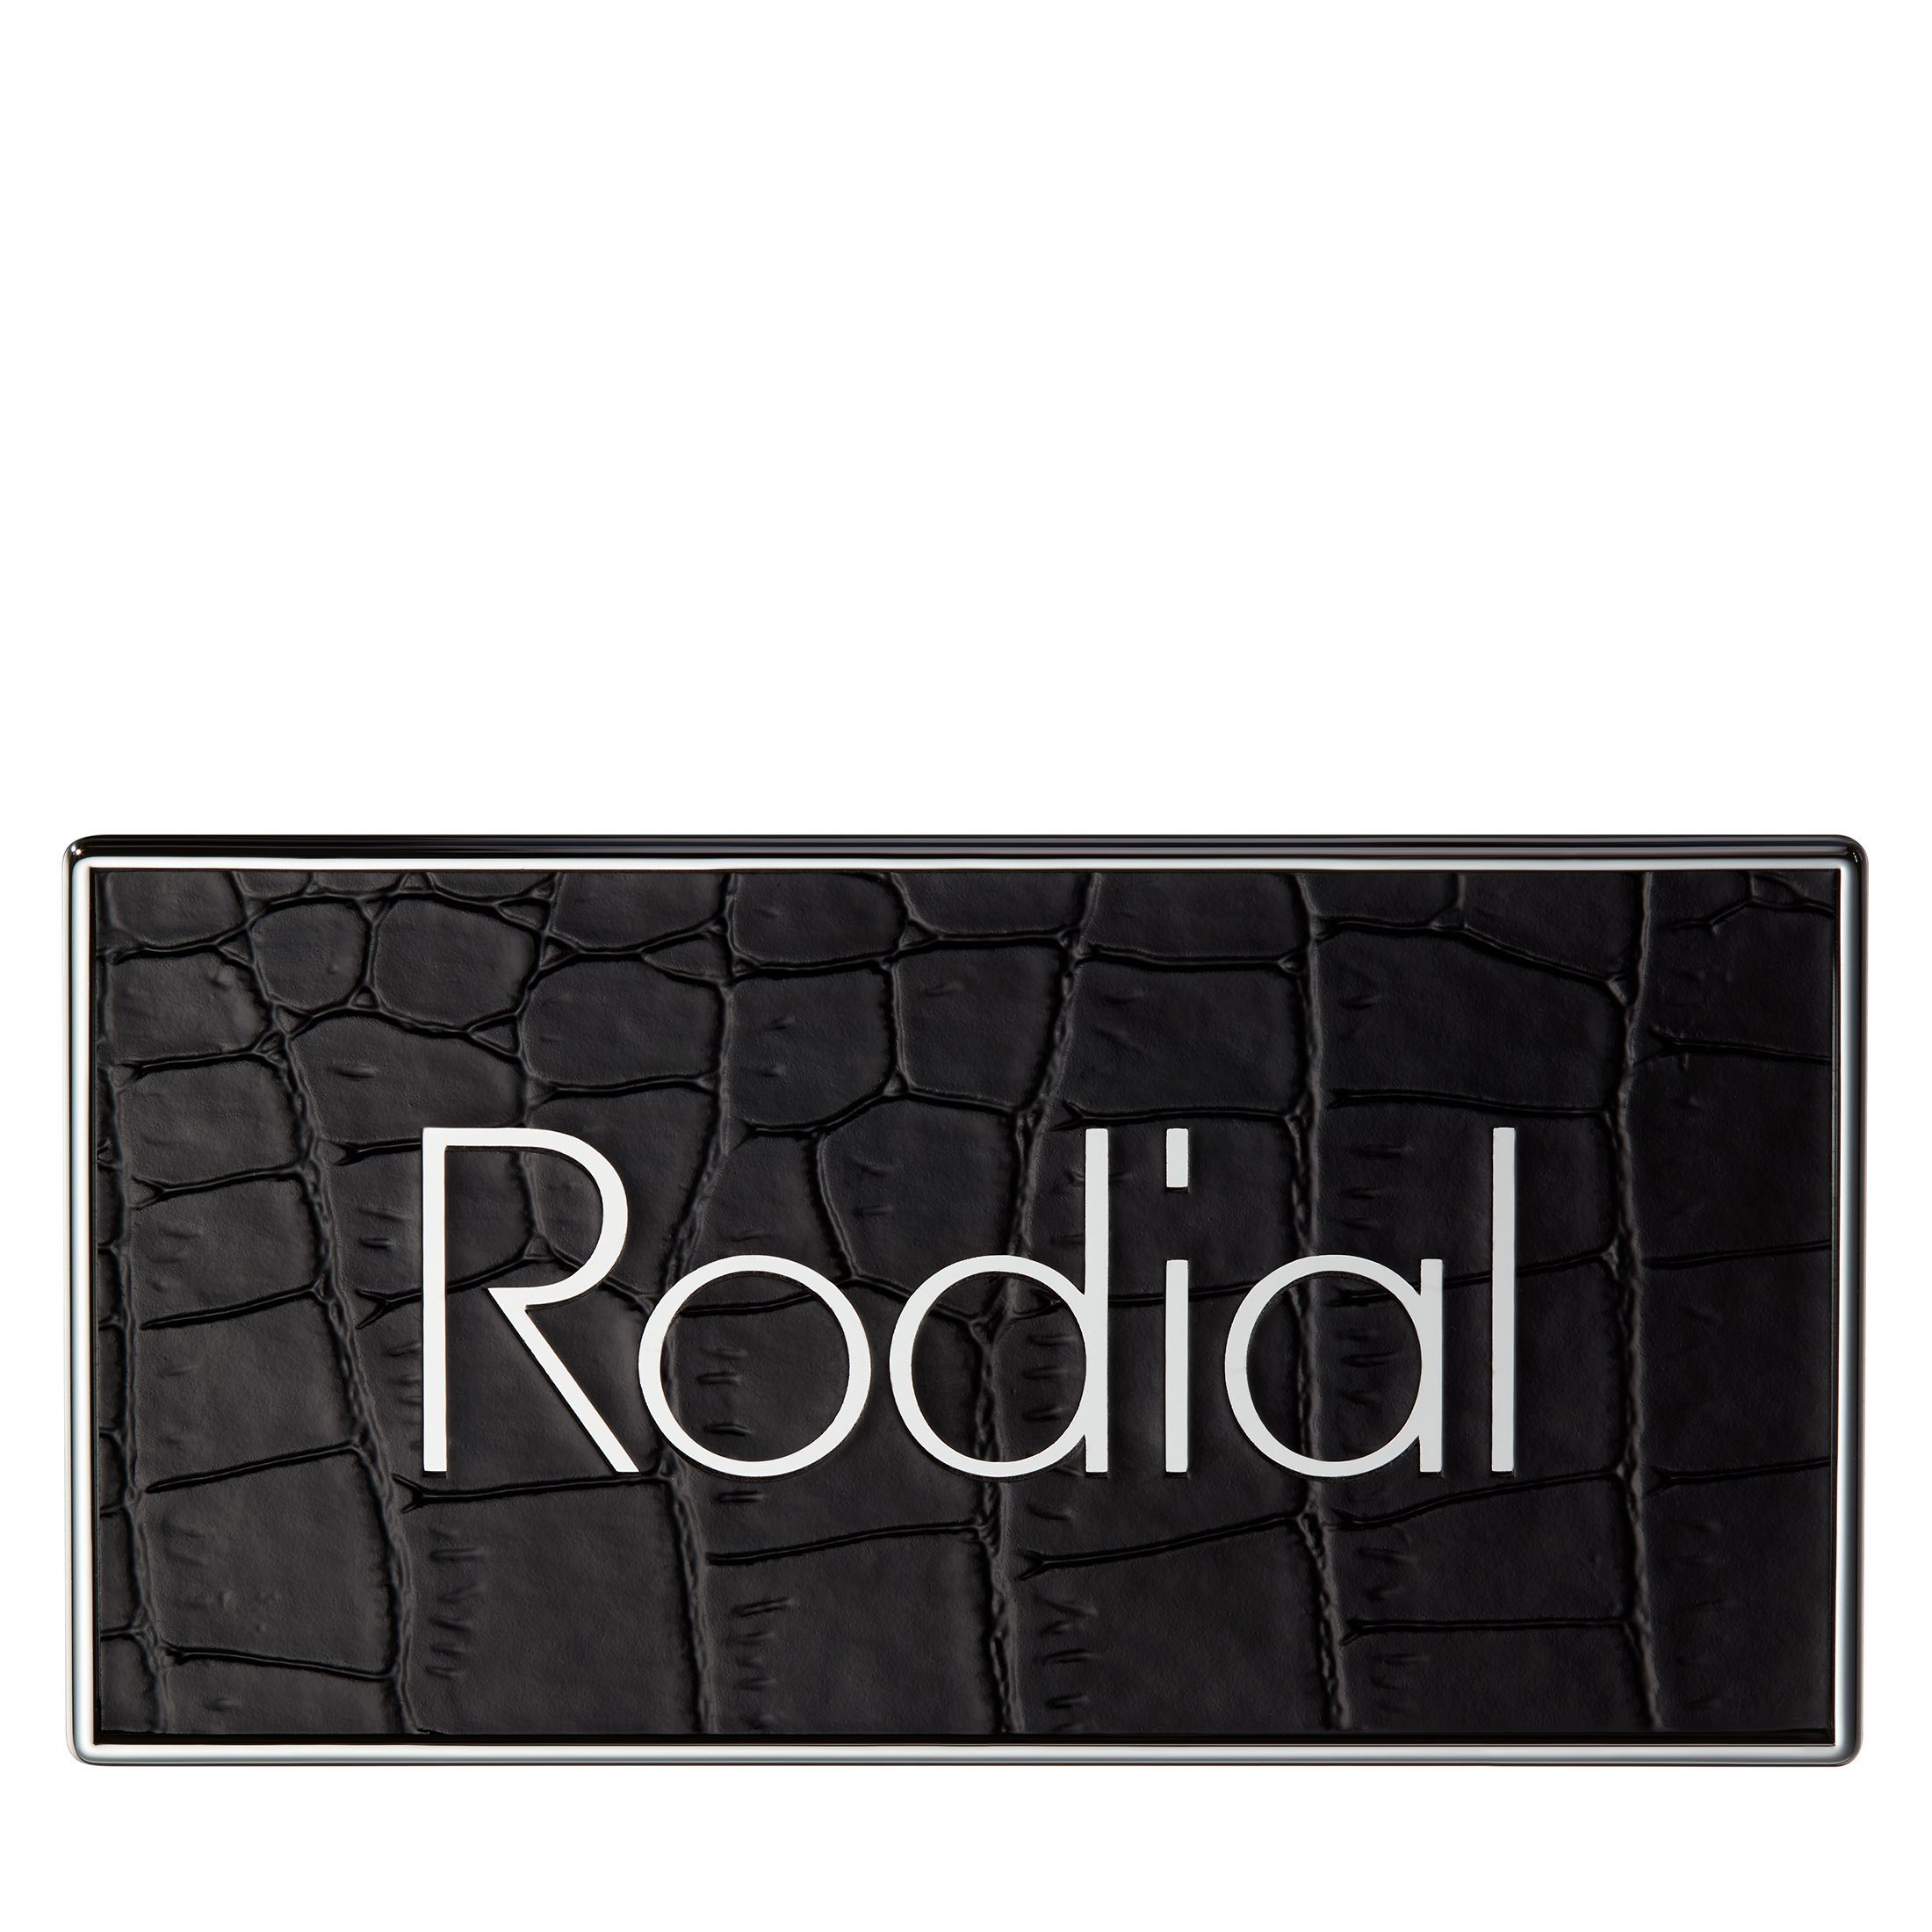 Like Puder This Palette Rodial Woke Puder I Rodial Up